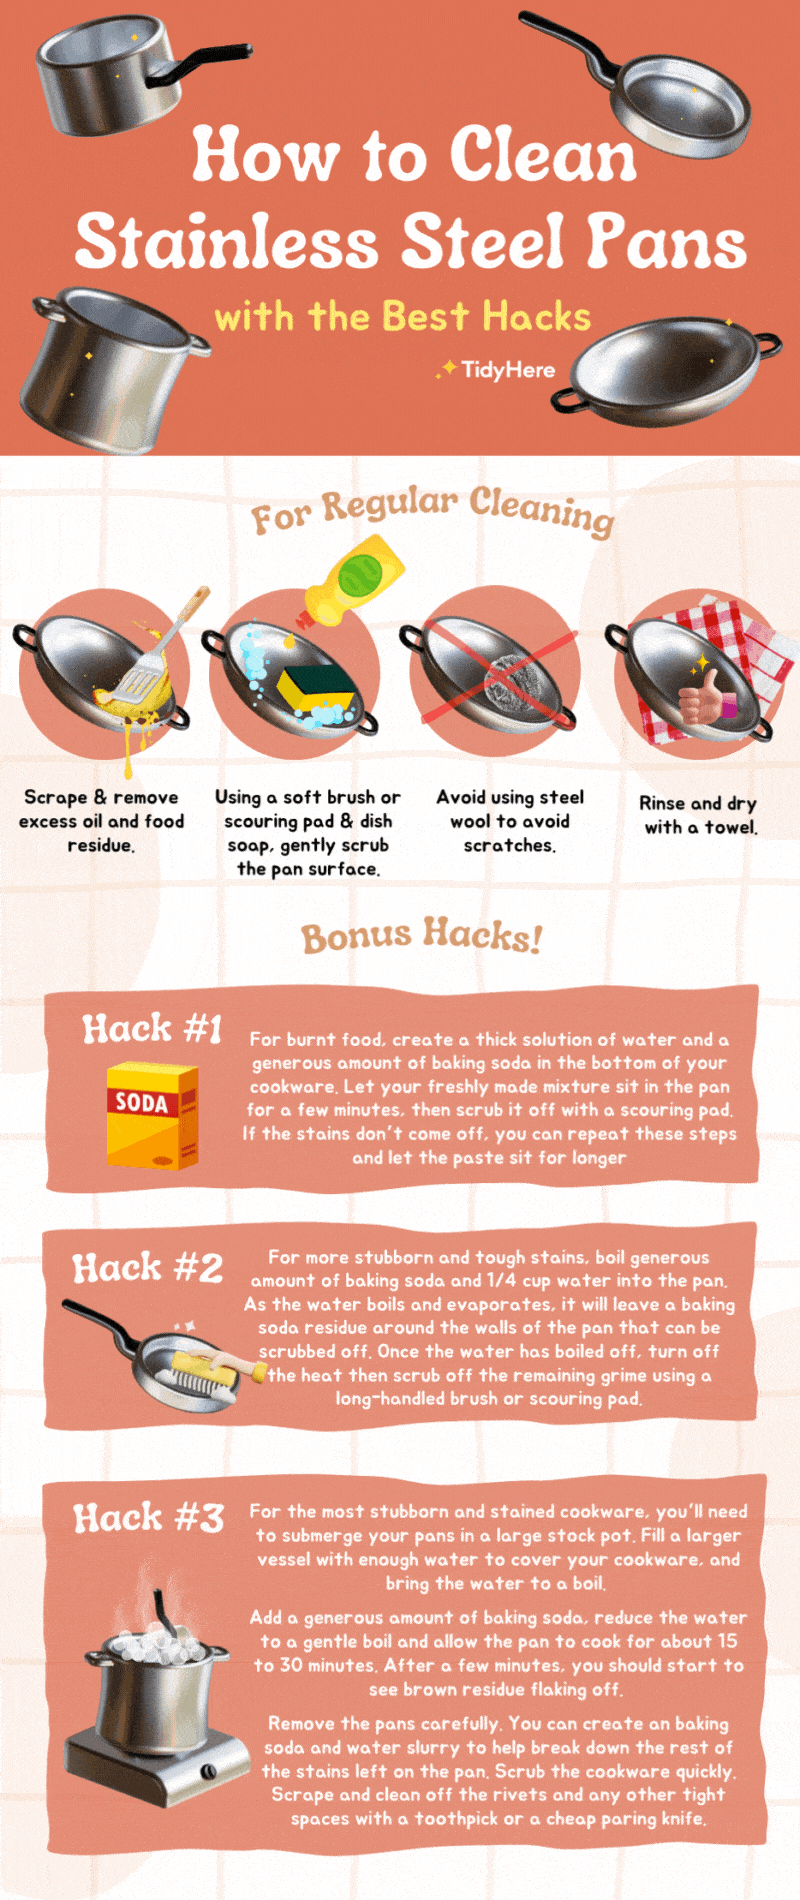 How to Clean Stainless Steel Pans with the Best Hacks Tidyhere Infographic